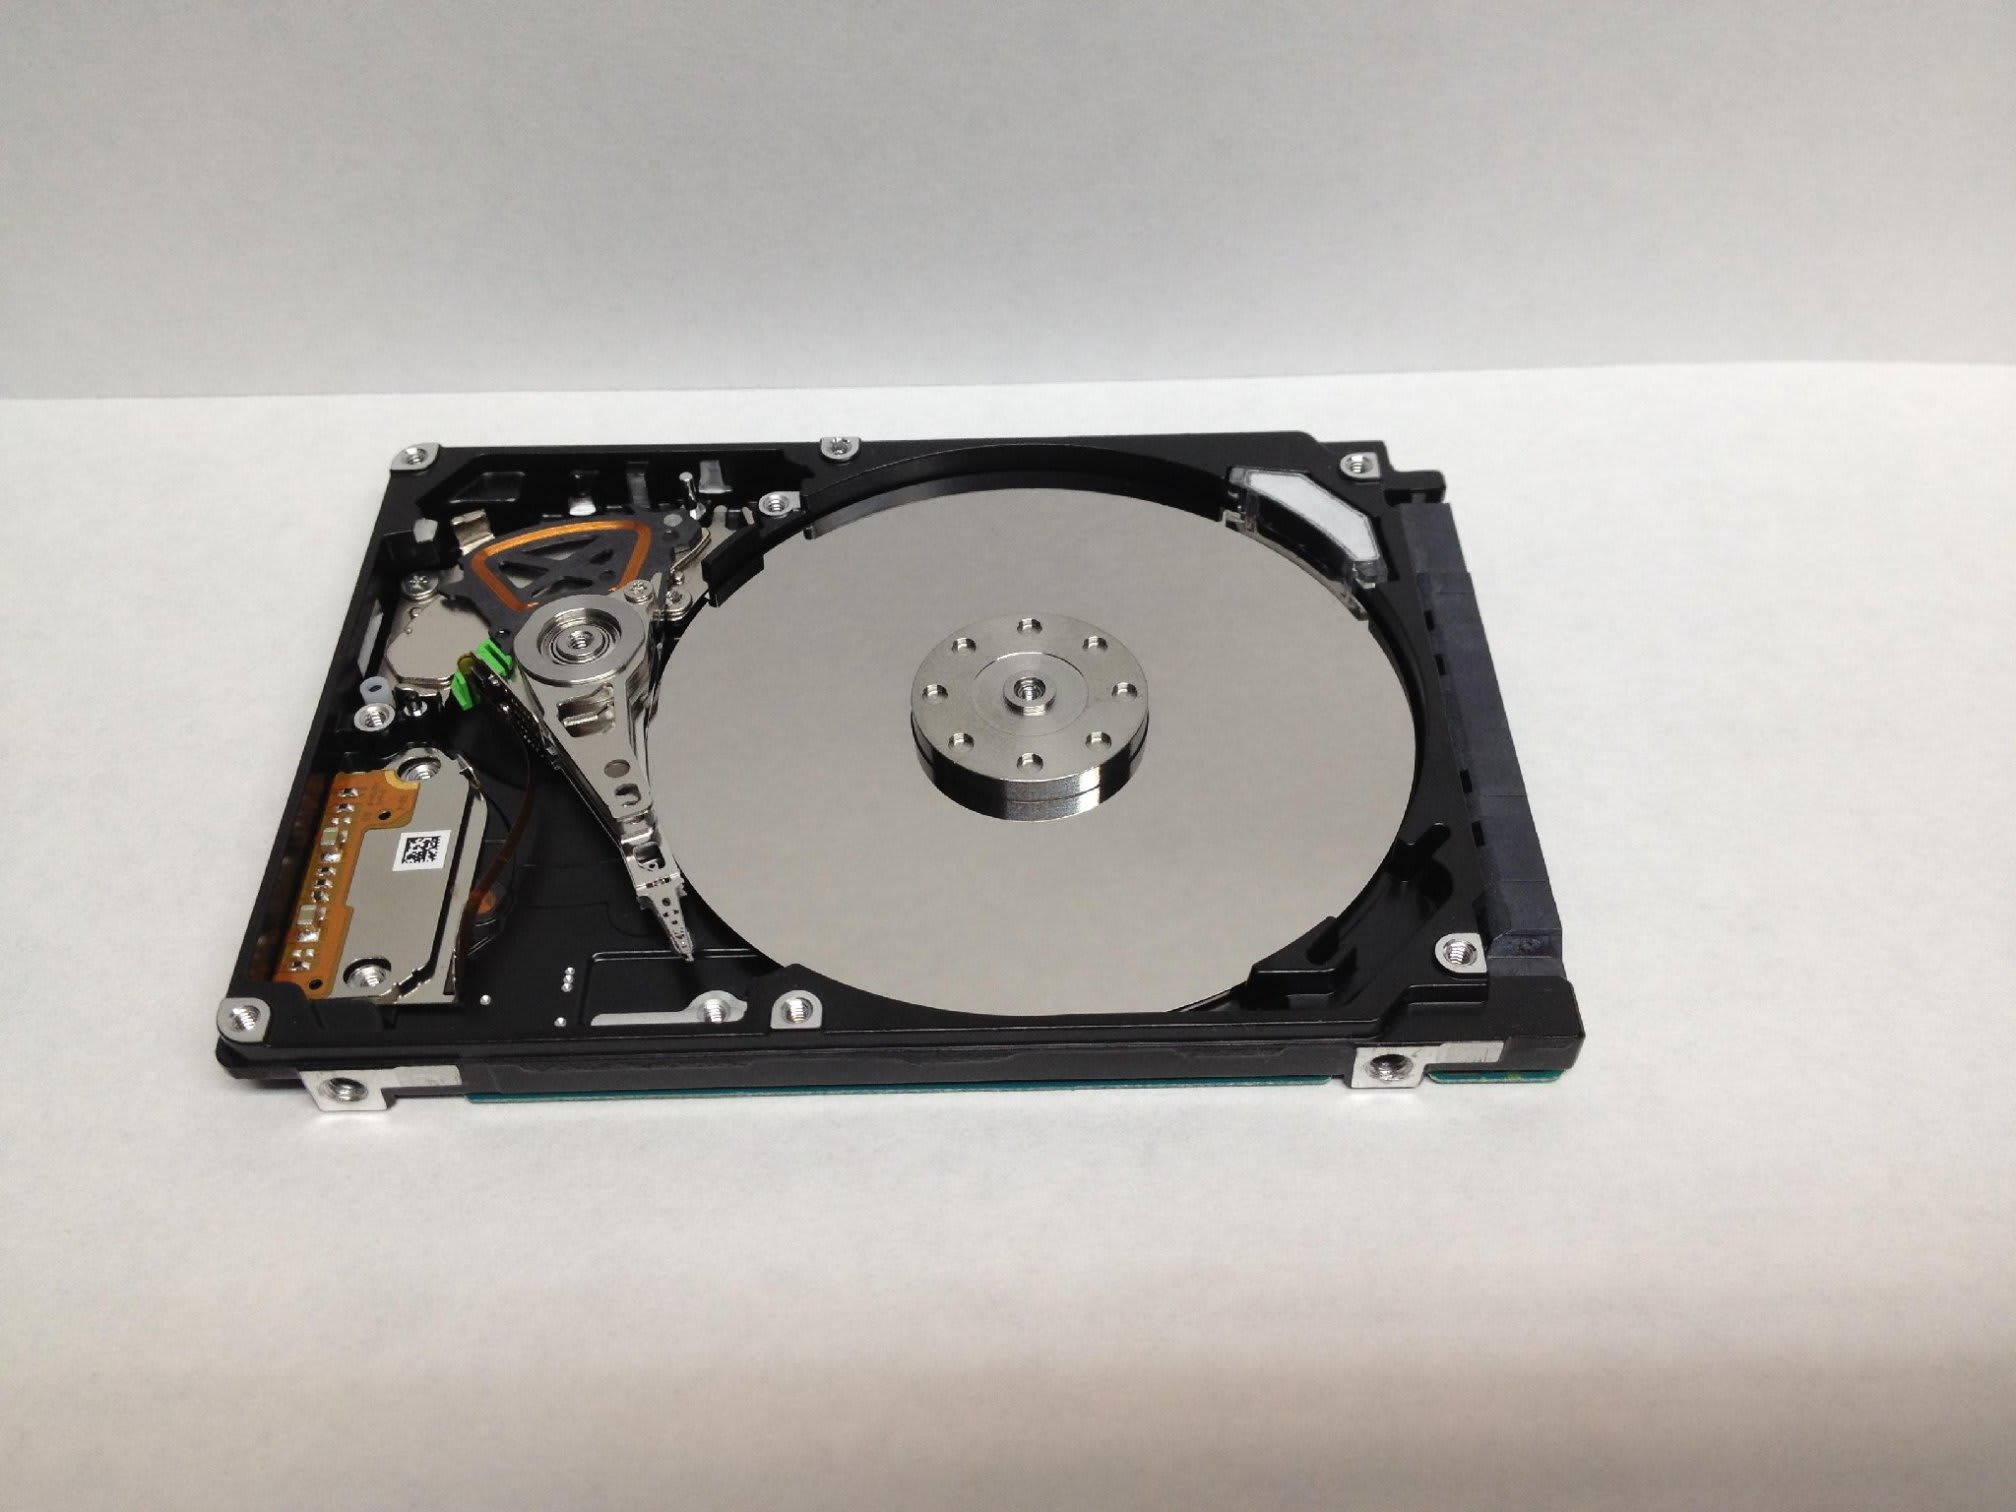 Images A J R Data Recovery